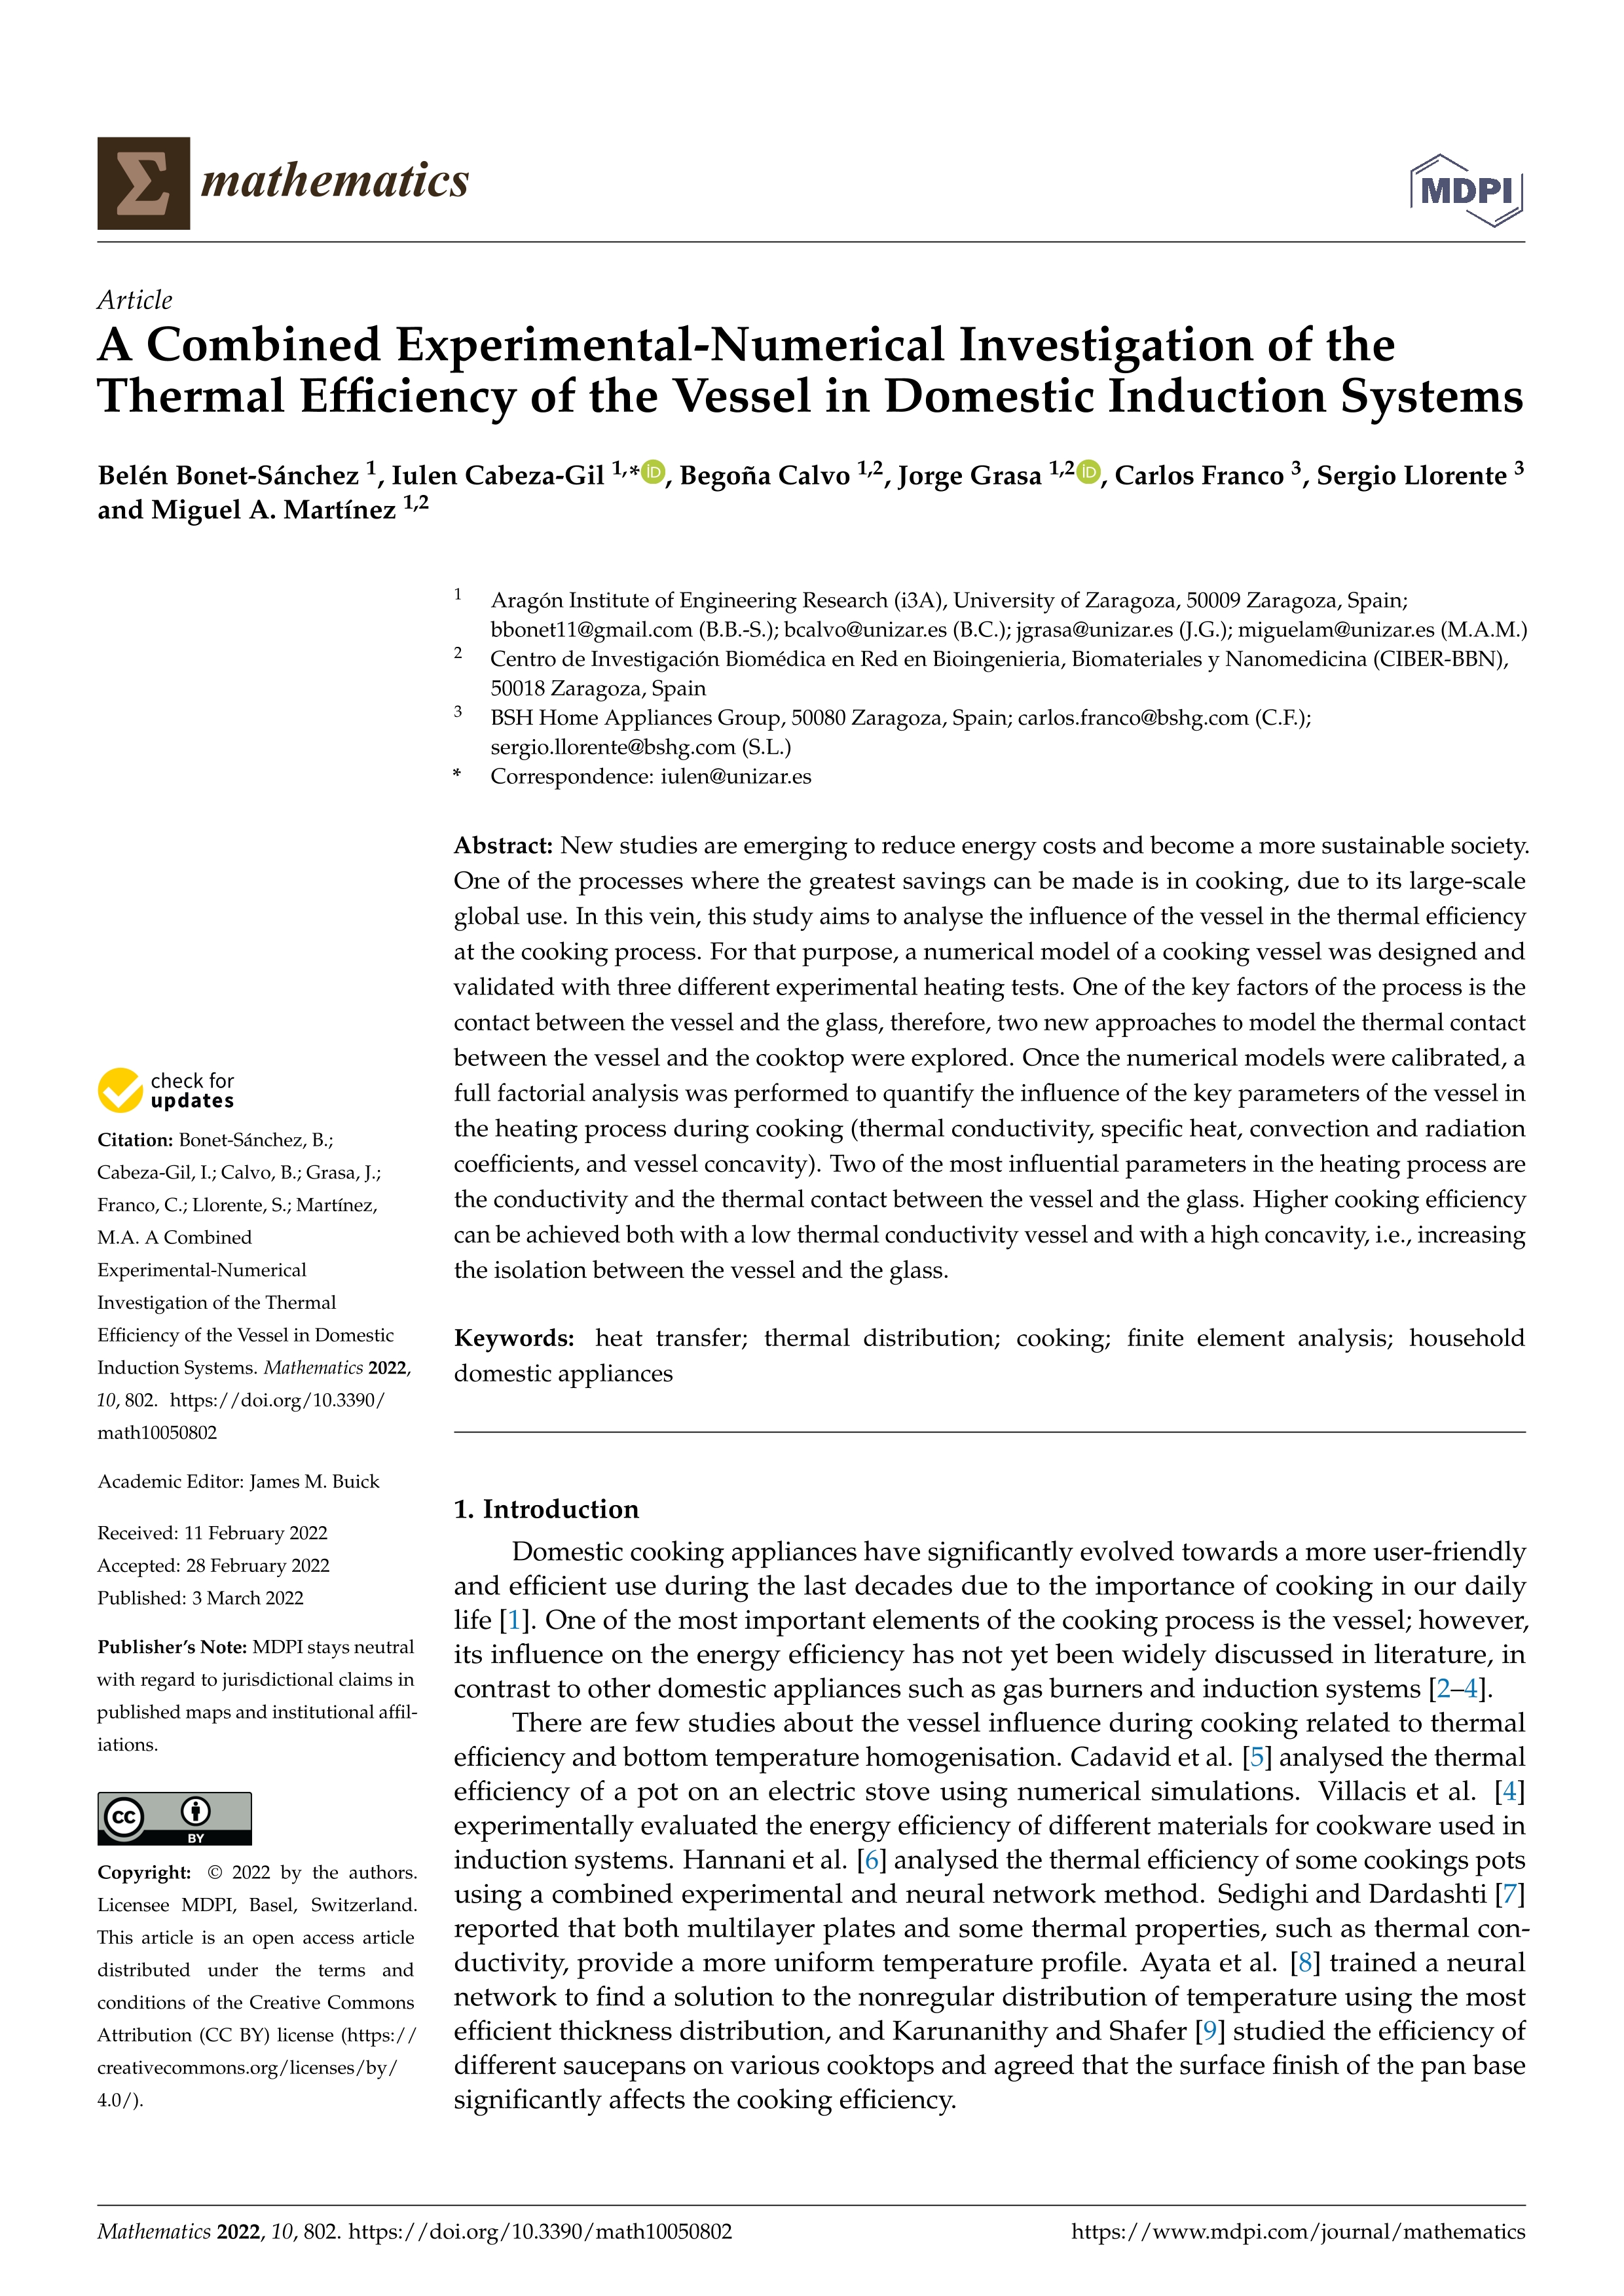 A Combined Experimental-Numerical Investigation of the Thermal Efficiency of the Vessel in Domestic Induction Systems